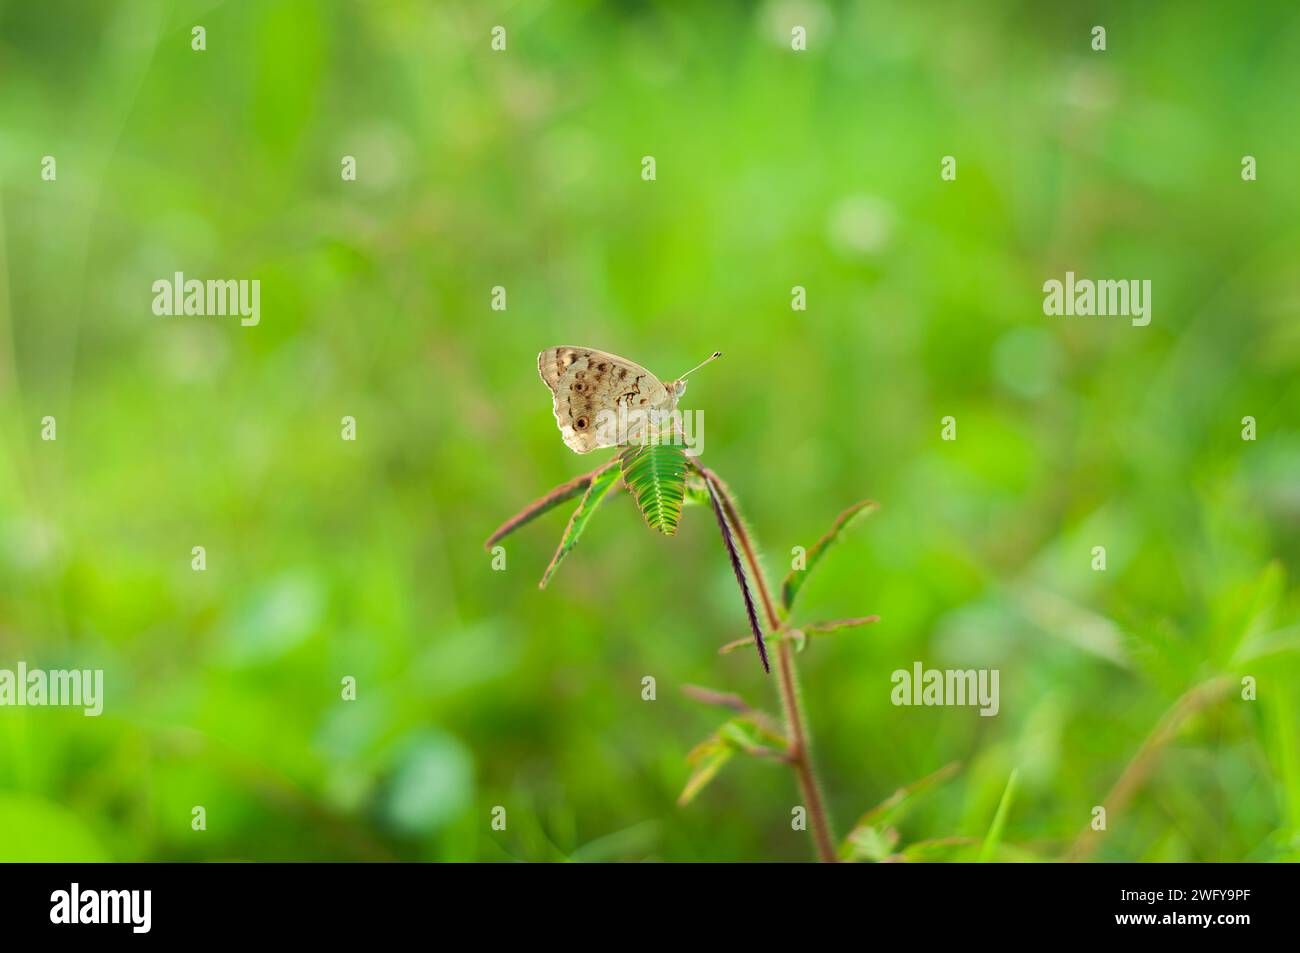 A Brown Butterfly Zizina otis perched in branch of the tree Stock Photo